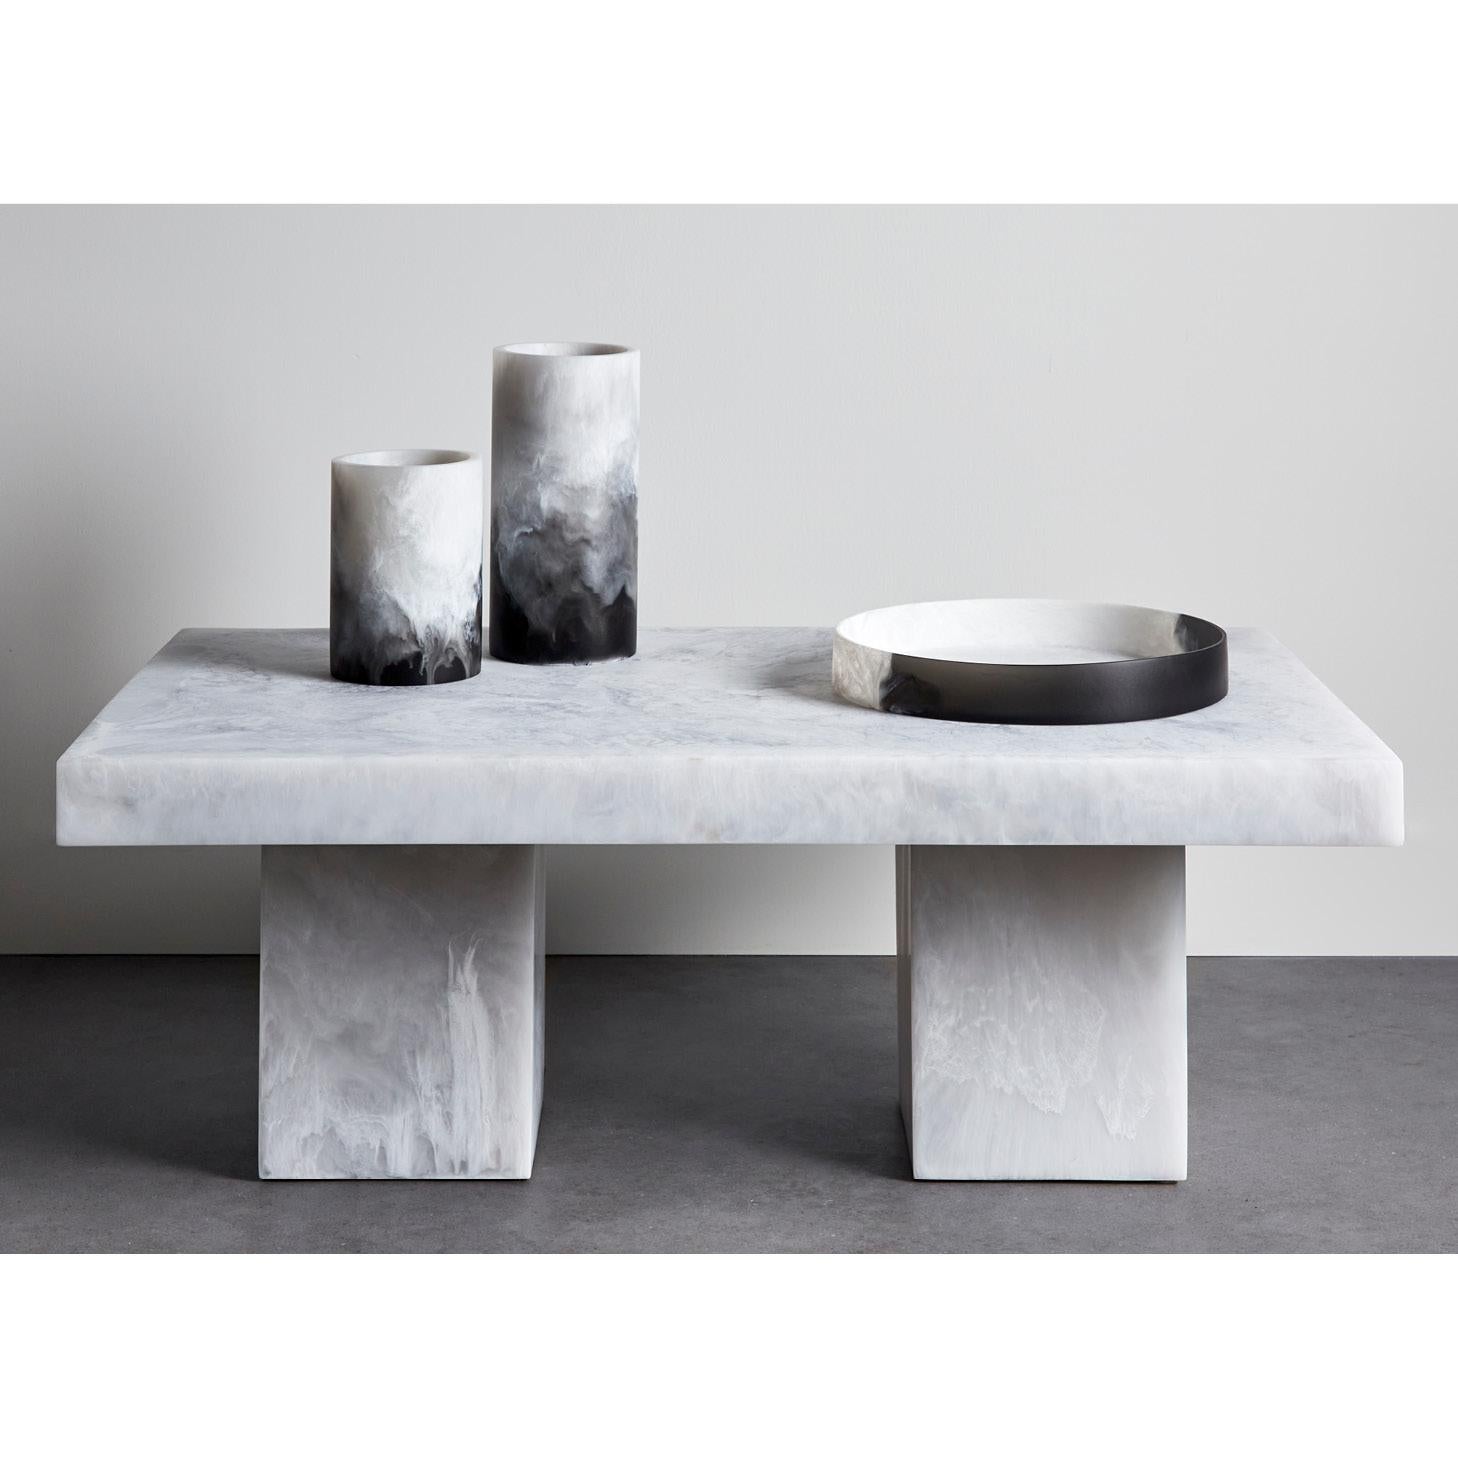 Studio Sturdy Lions Coffee Table – White Marble Resin In New Condition For Sale In Vancouver, CA